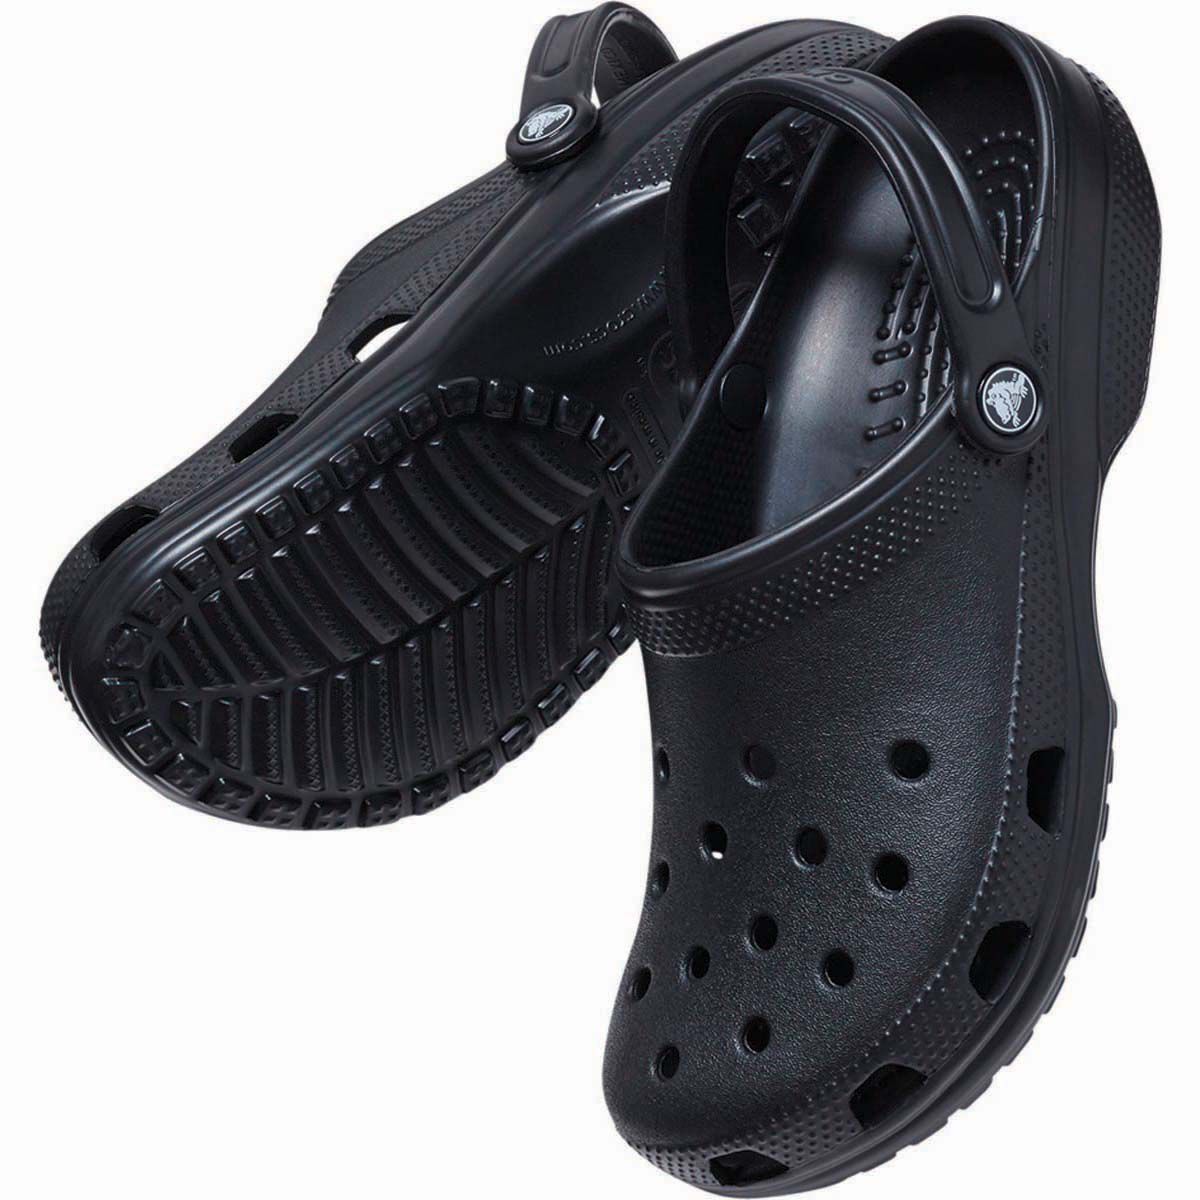 who sells croc shoes near me